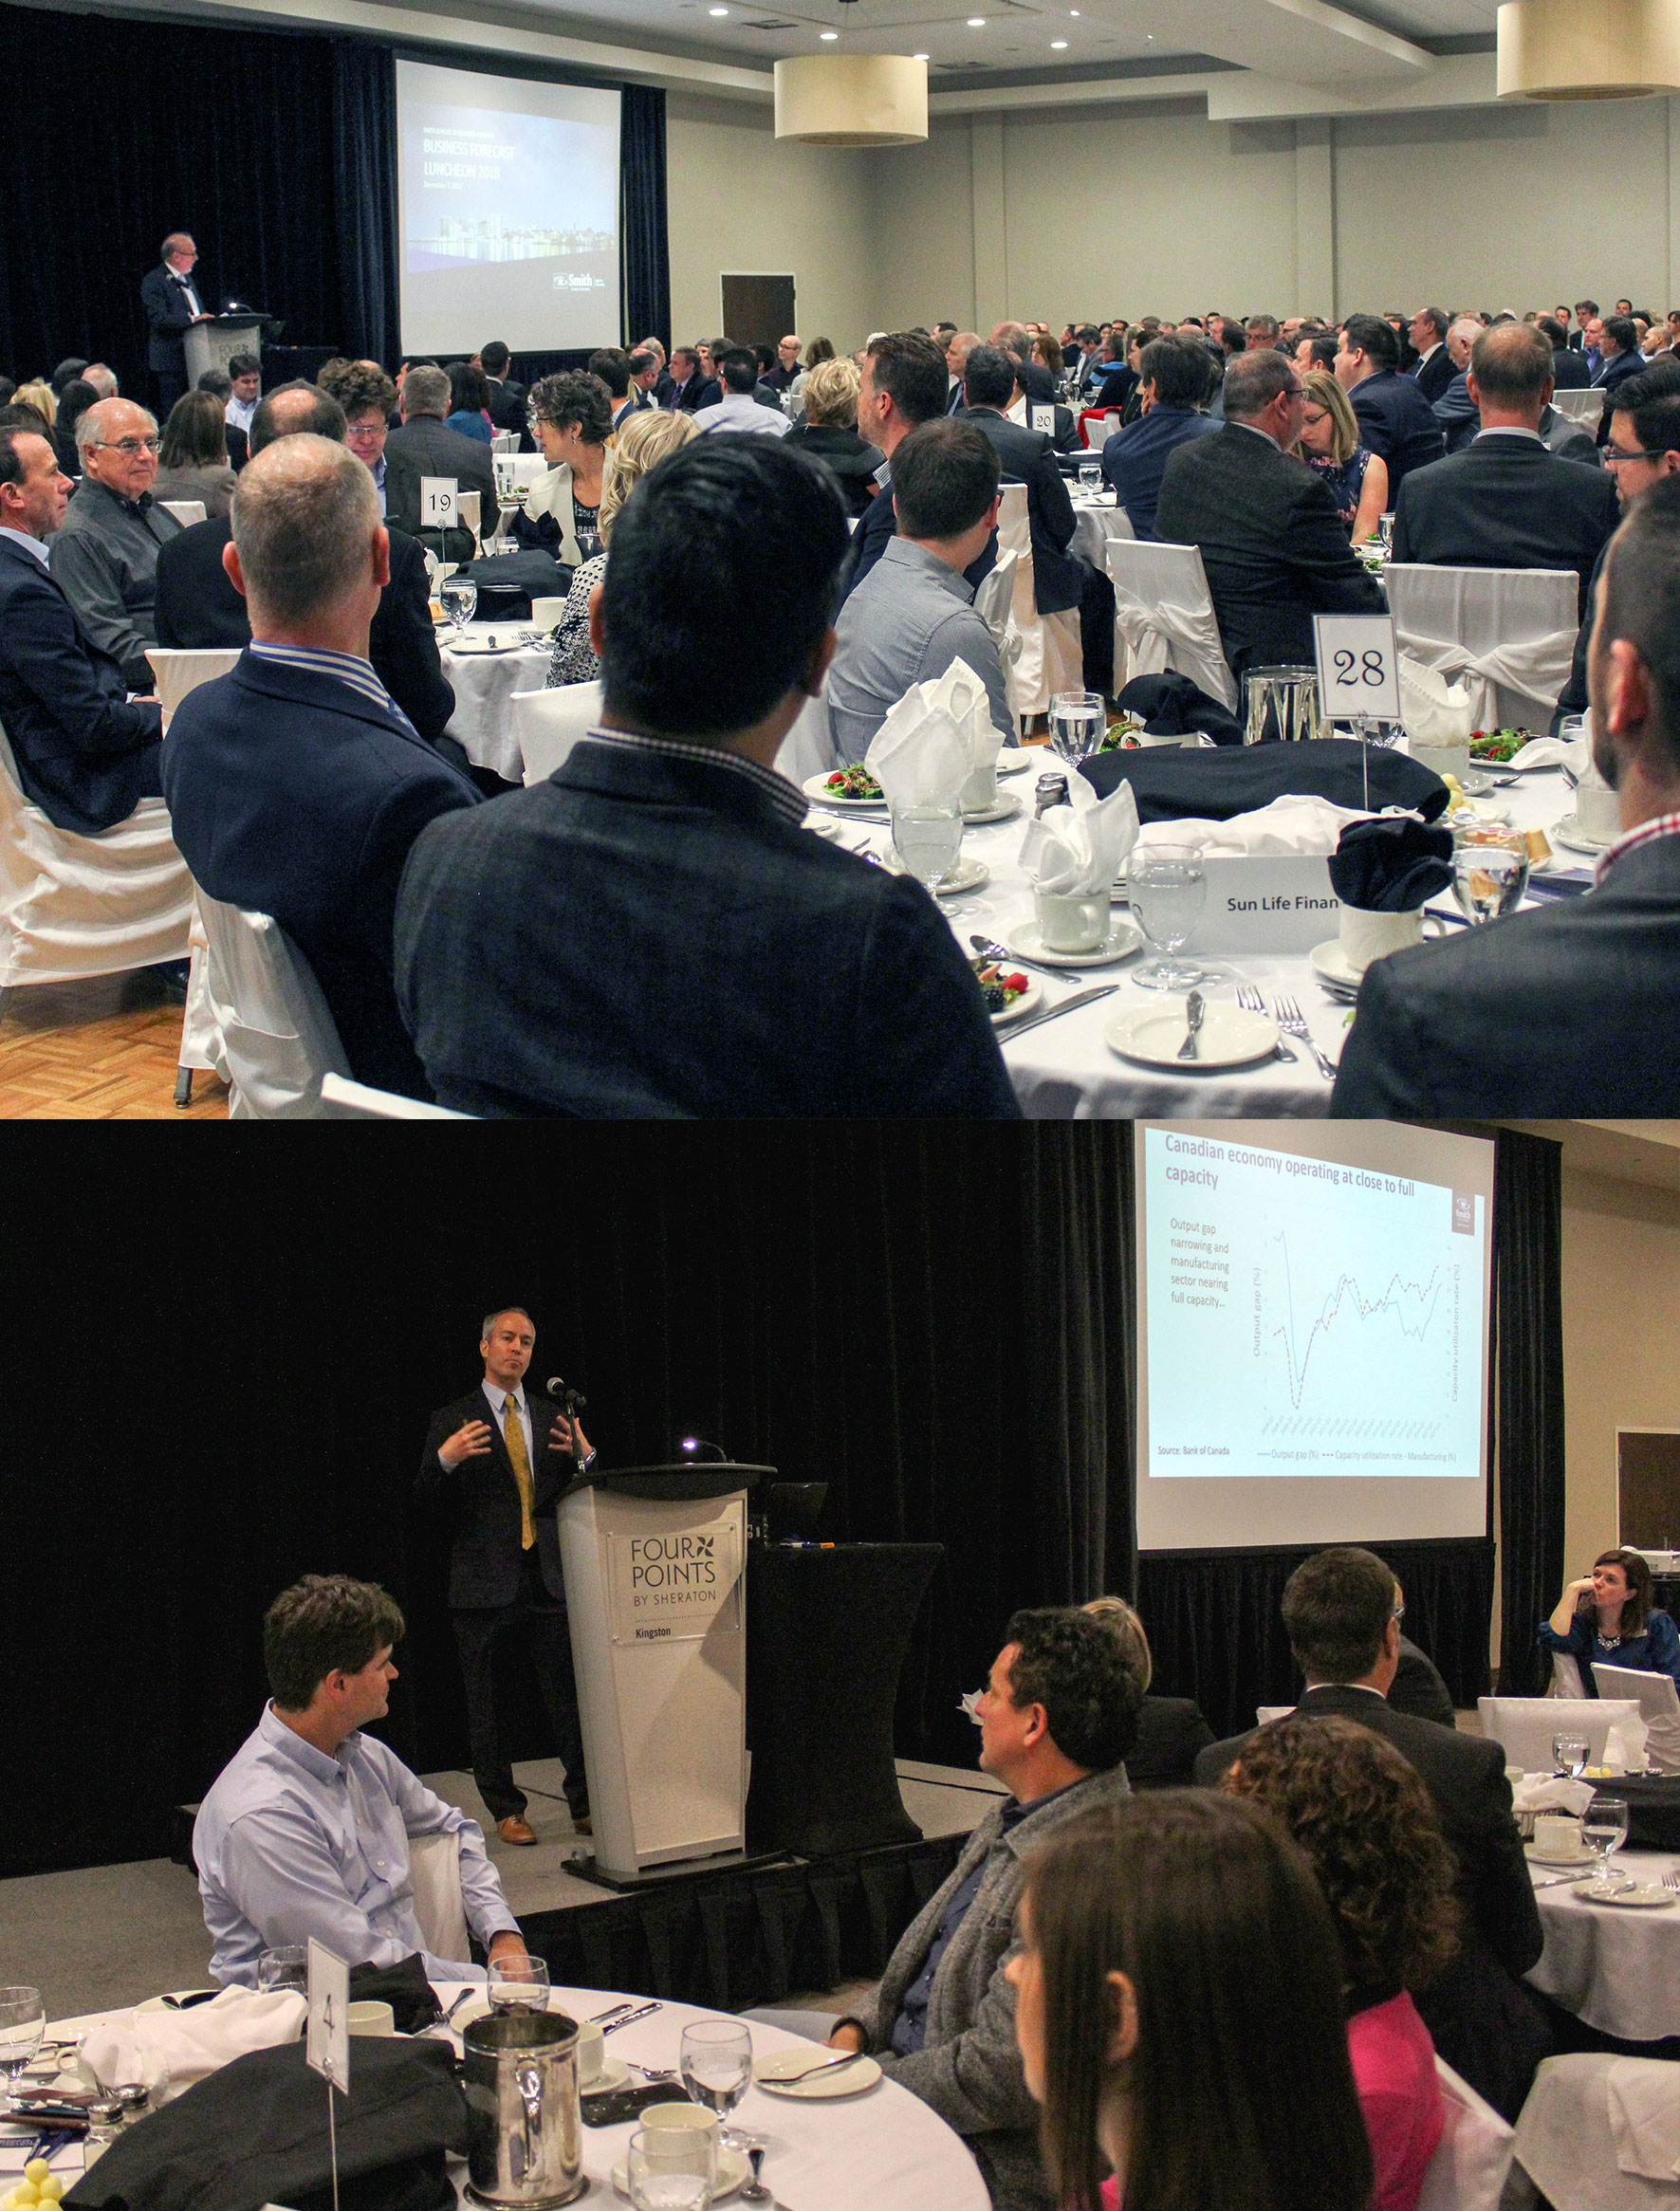 The 2018 Smith Business Forecast Luncheon was held Dec. 7 at the Four Points Sheraton Kingston.